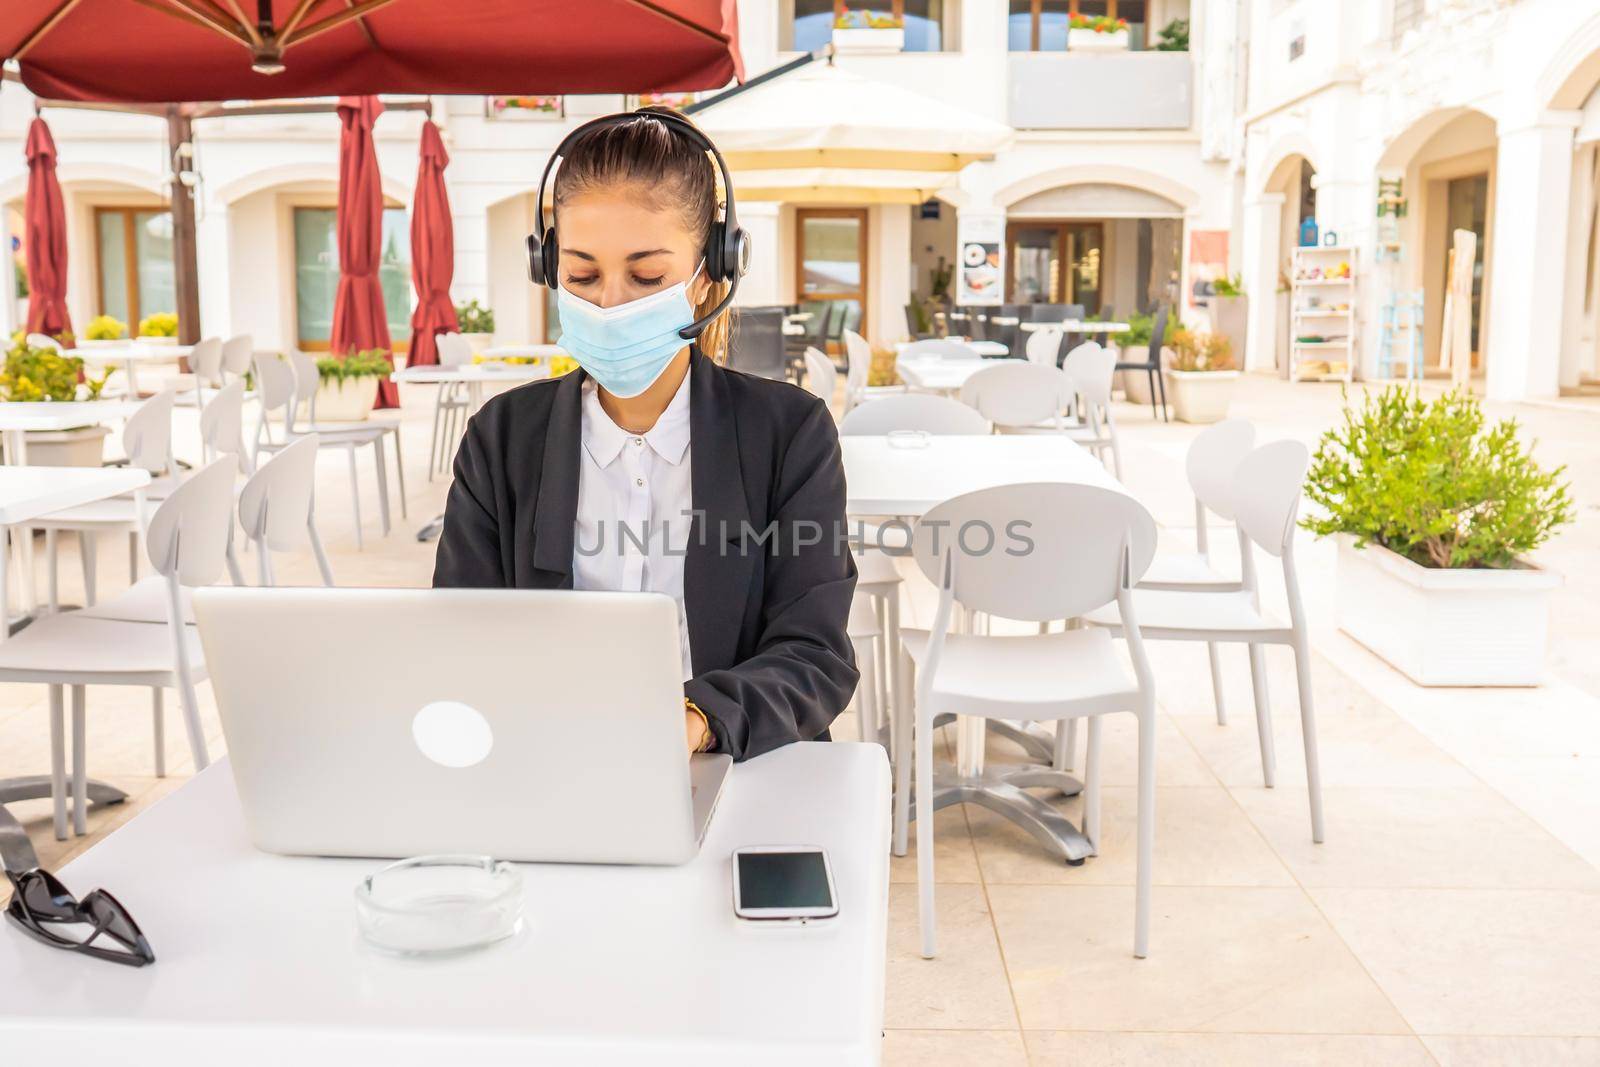 Self entrepreneur woman working in outdoor bar table using laptop wearing protective medical face mask due to social distancing for Covid-19 pandemic. New normal jobs with mobile wi-fi technology by robbyfontanesi